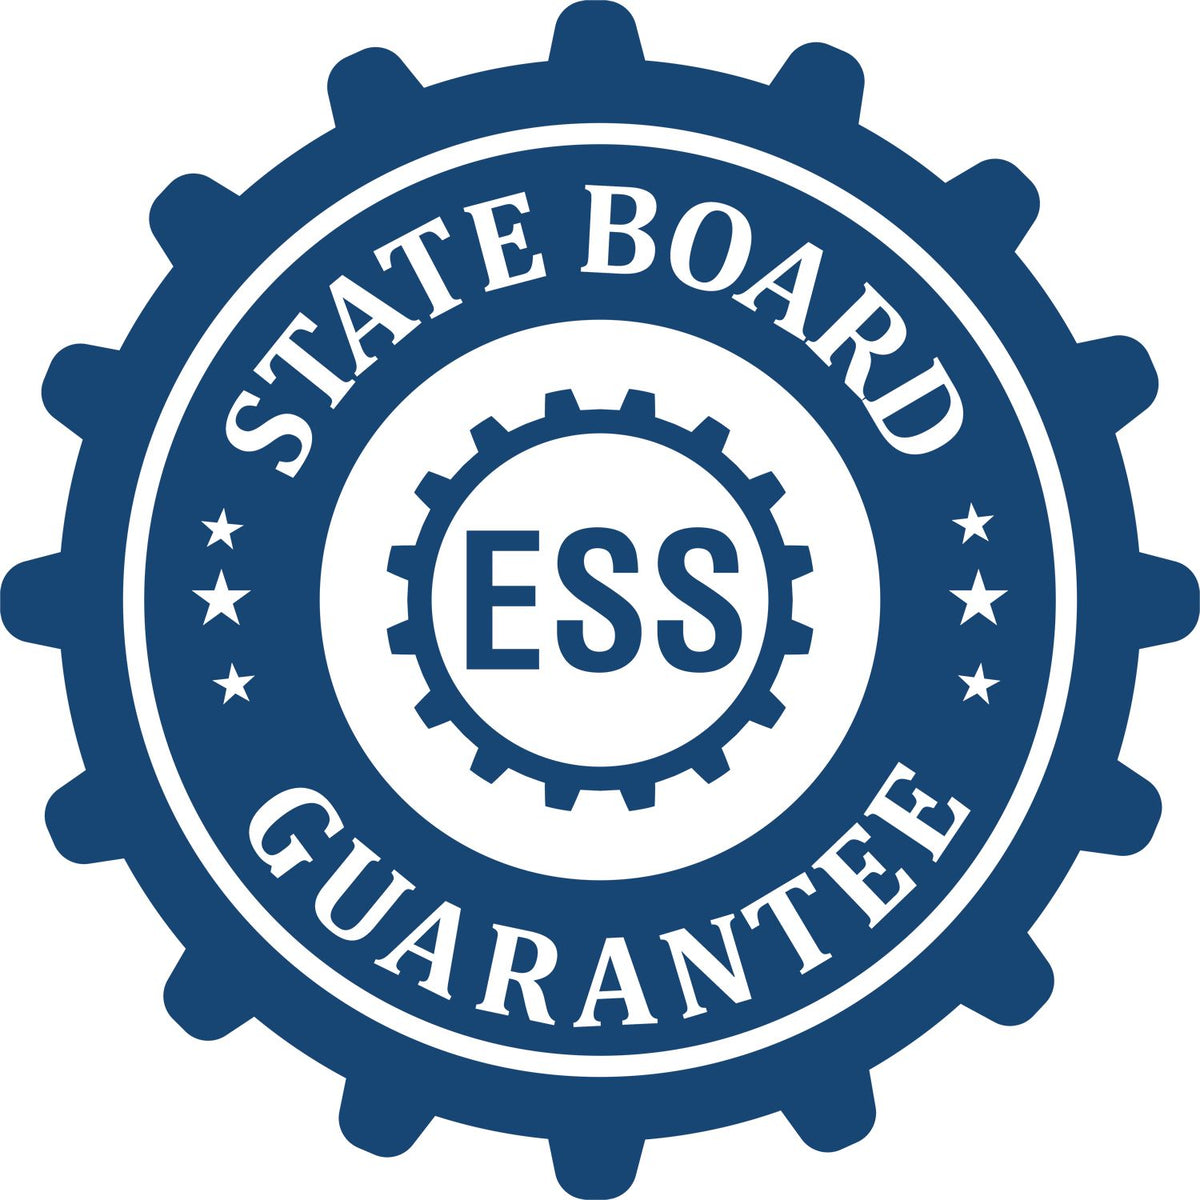 An emblem in a gear shape illustrating a state board guarantee for the North Carolina Landscape Architectural Seal Stamp product.